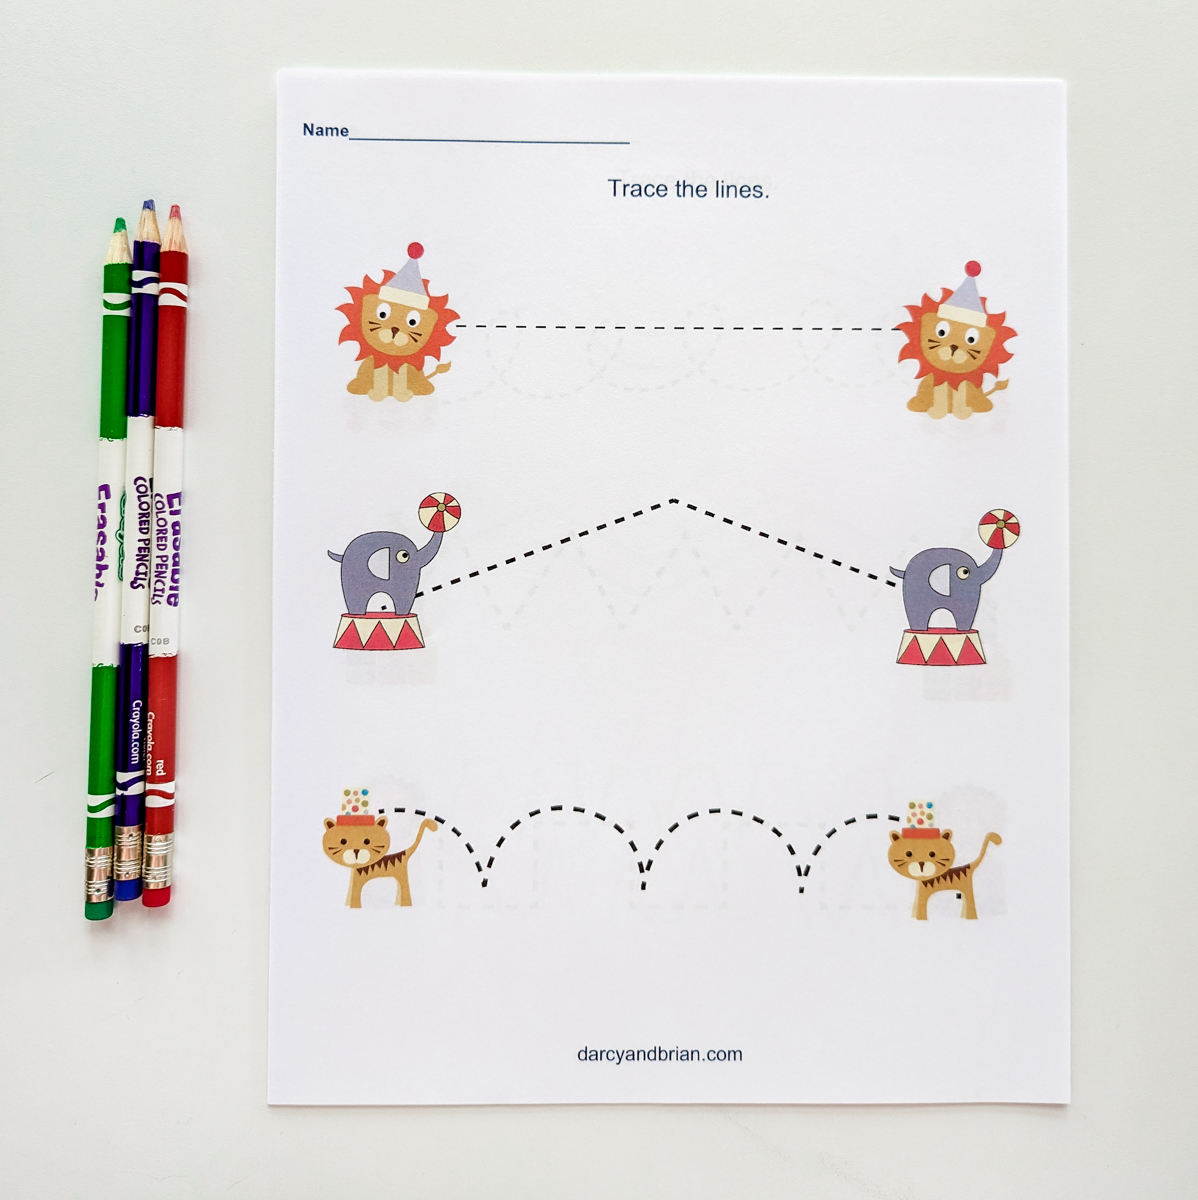 Circus line tracing printable with circus animals on it. A few colored pencils lay next to it.